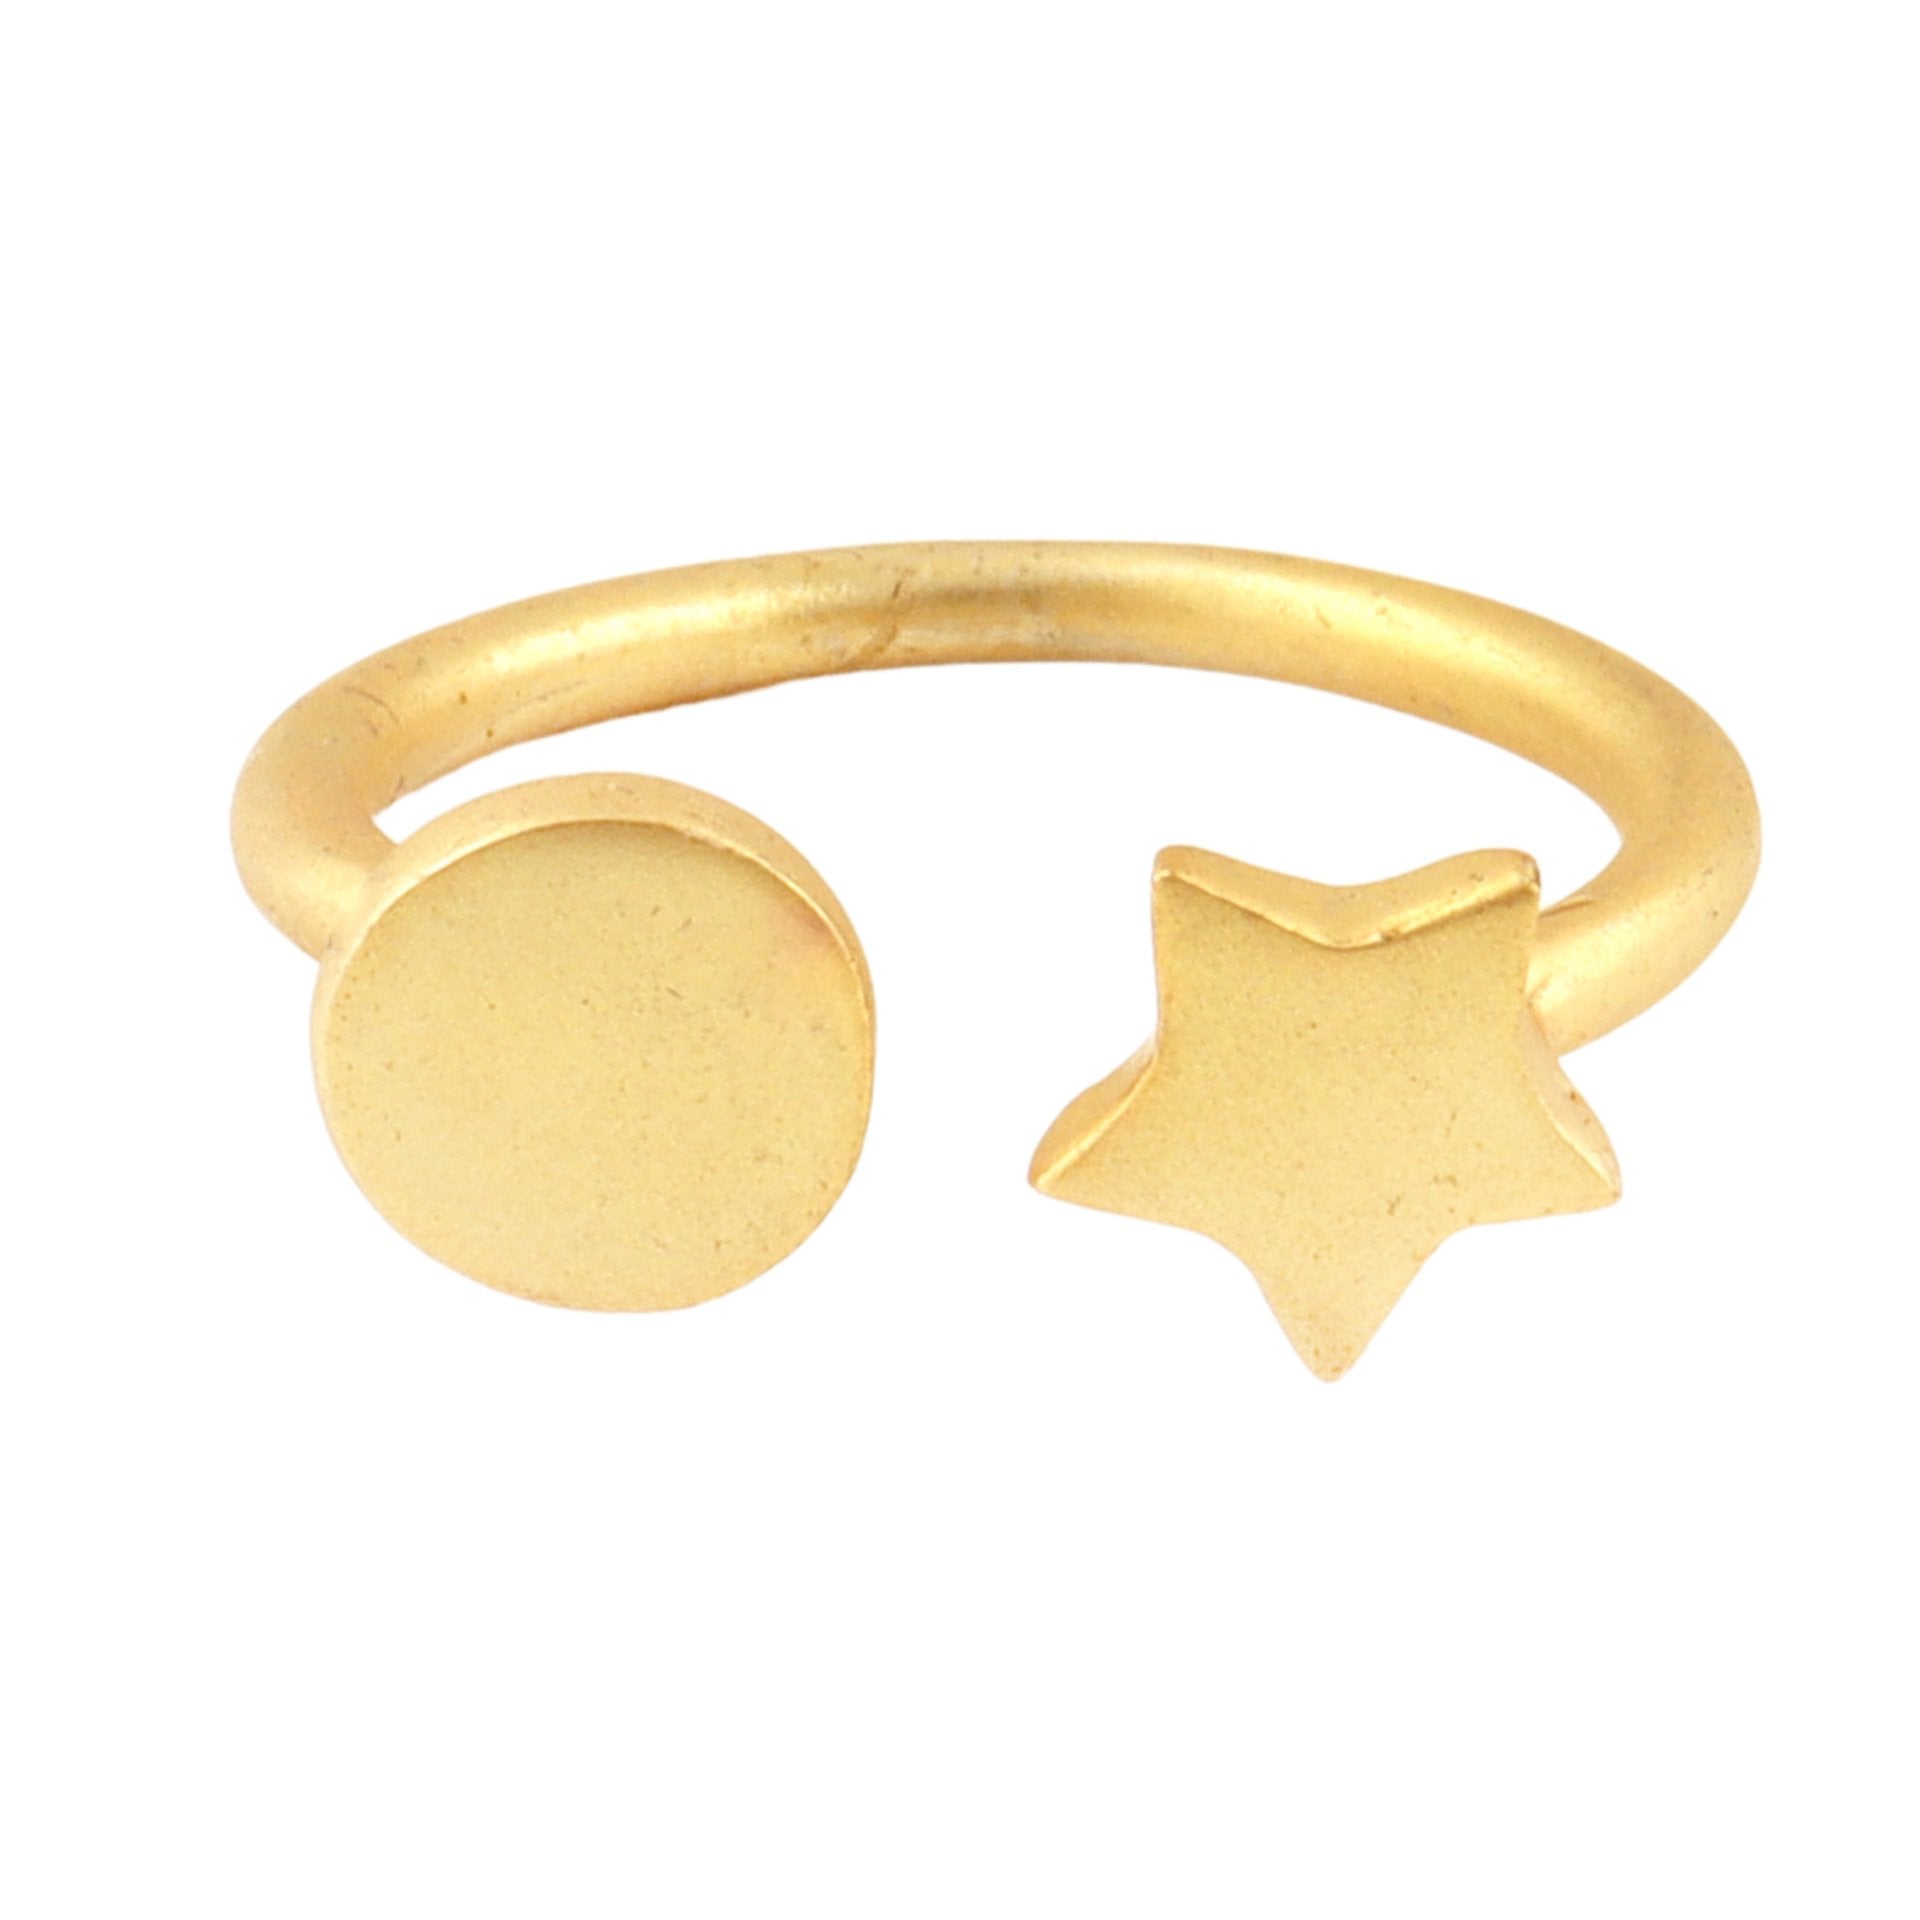 Handcrafted Adjustable Gold-Plated Ring with Circle and Star - SBJ